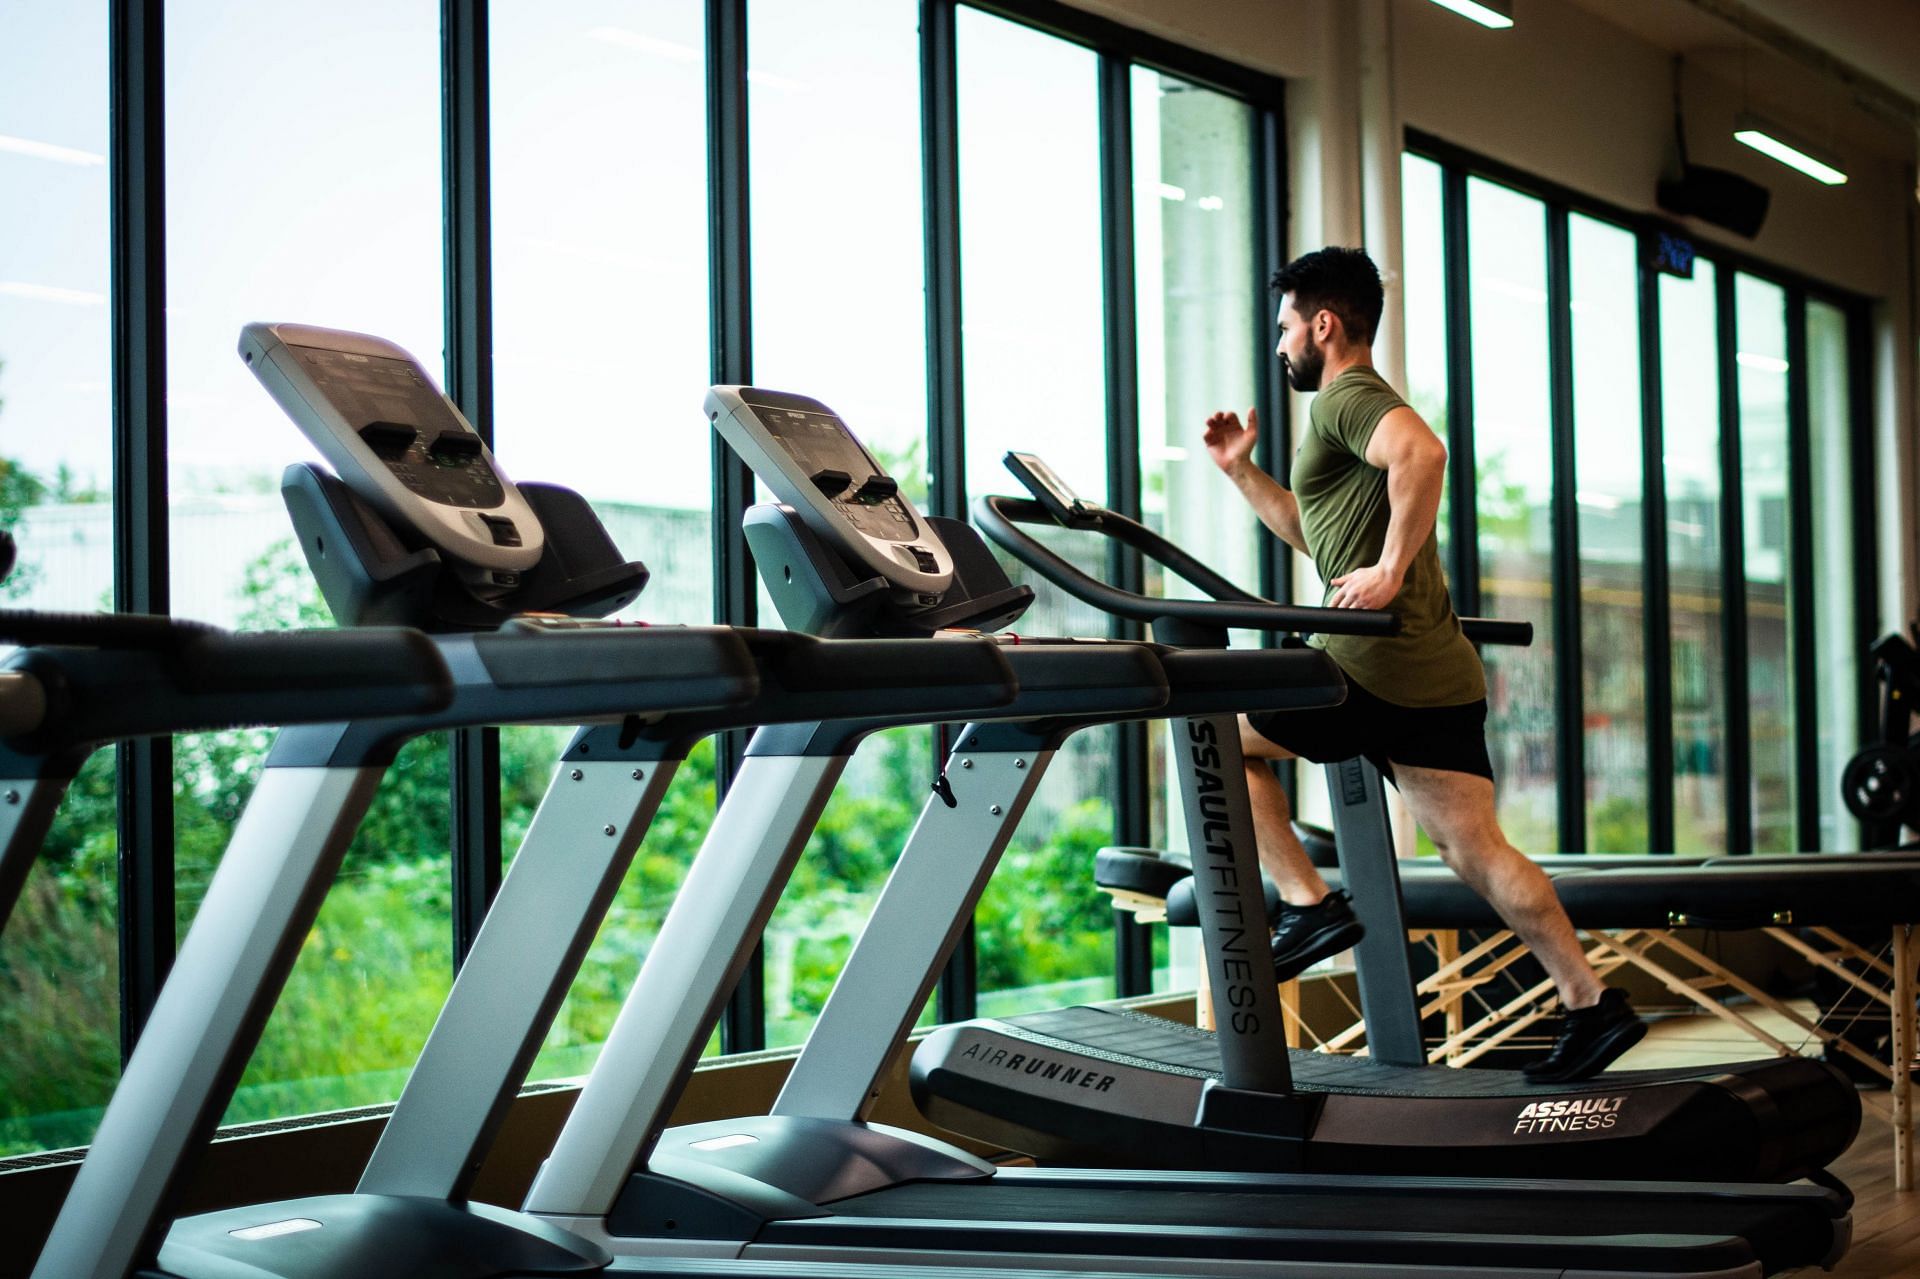 Incline workouts are an excellent way to develop speed and power. (Image via Pexels/William Choquette)